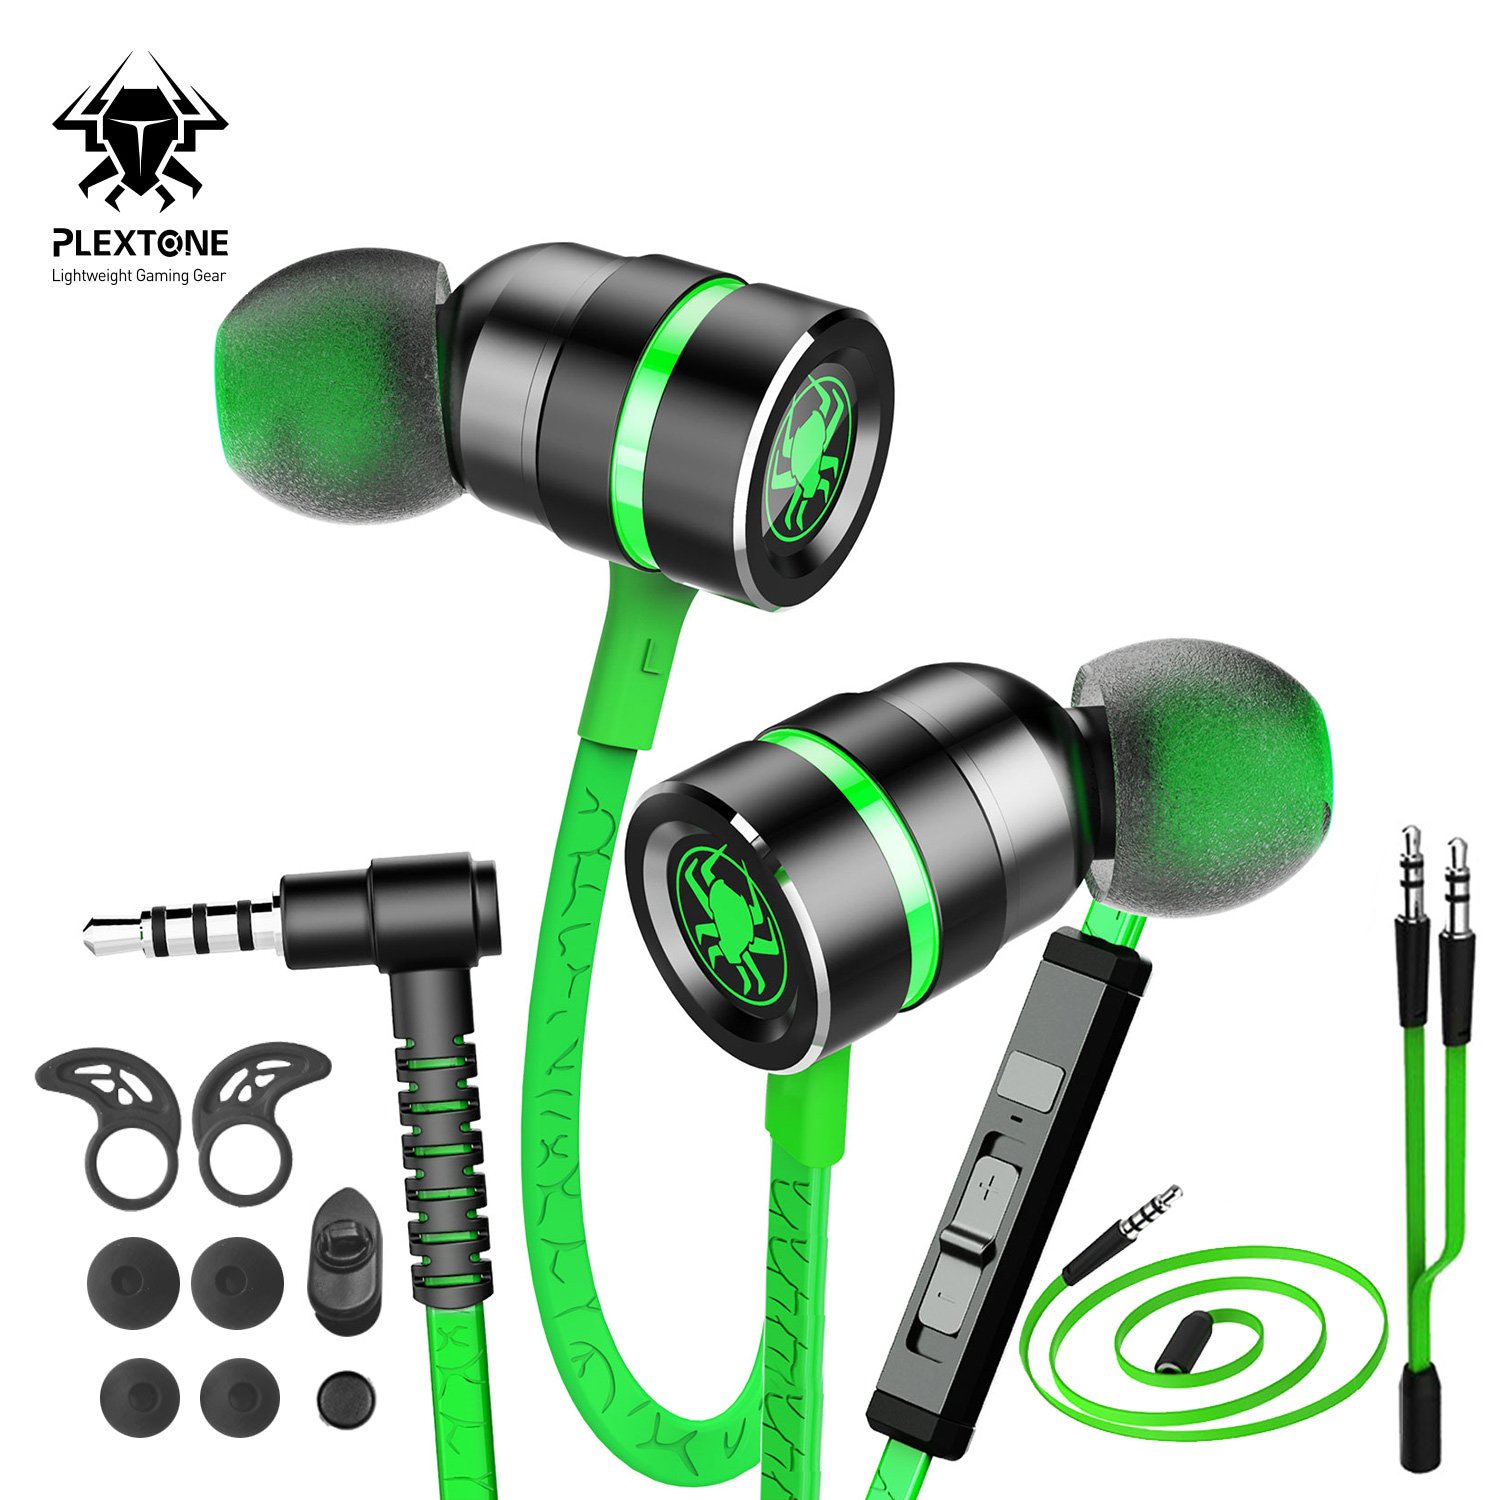 Best Selling Amazon Plextone G20 USB C 3.5mm Anti Current 3D Sound Wired Game Earphone Earbuds